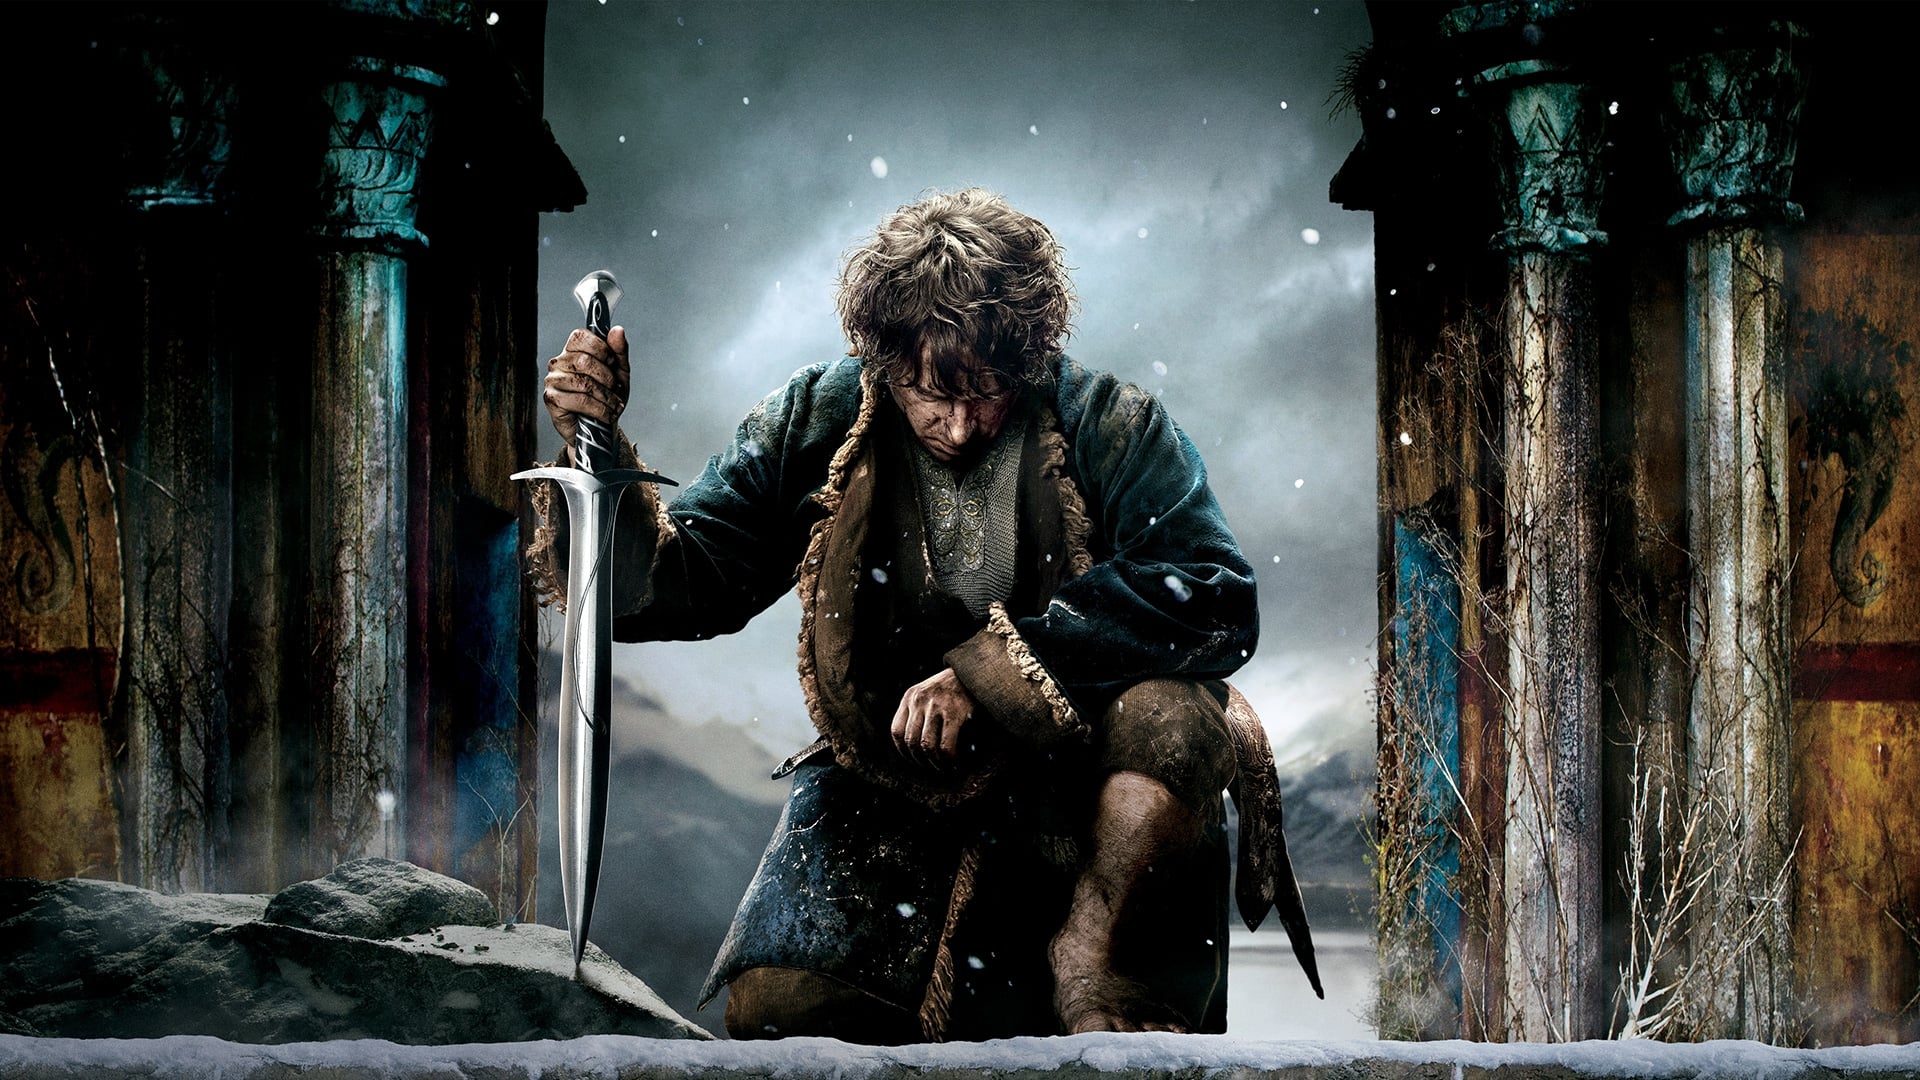 The Hobbit: The Battle of the Five Armies 2014 123movies